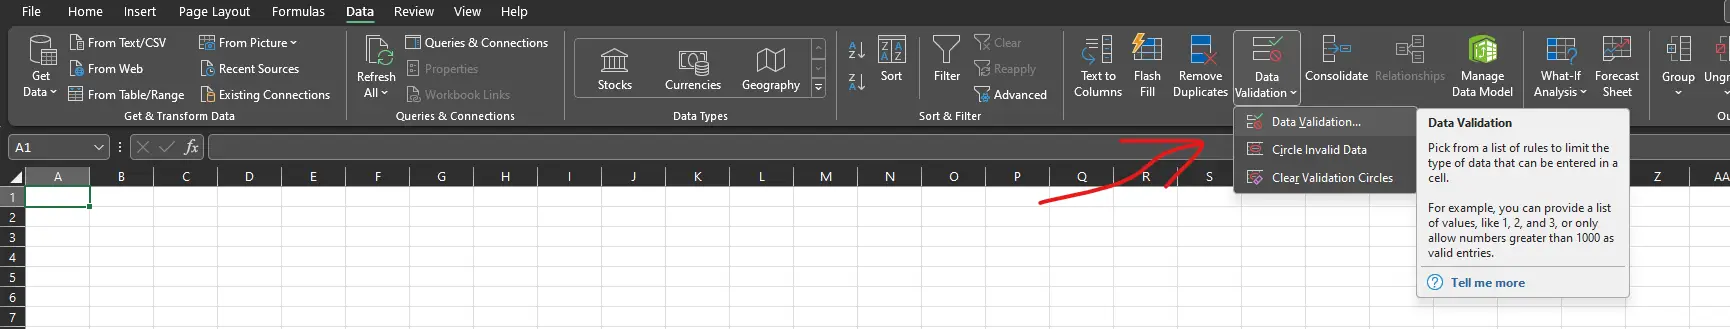 A screenshot of a Microsoft Excel interface showing an arrow pointing towards the "Data Validation" button under the "Data" tab on the toolbar, used for creating drop-down lists in visible gridlines and cells